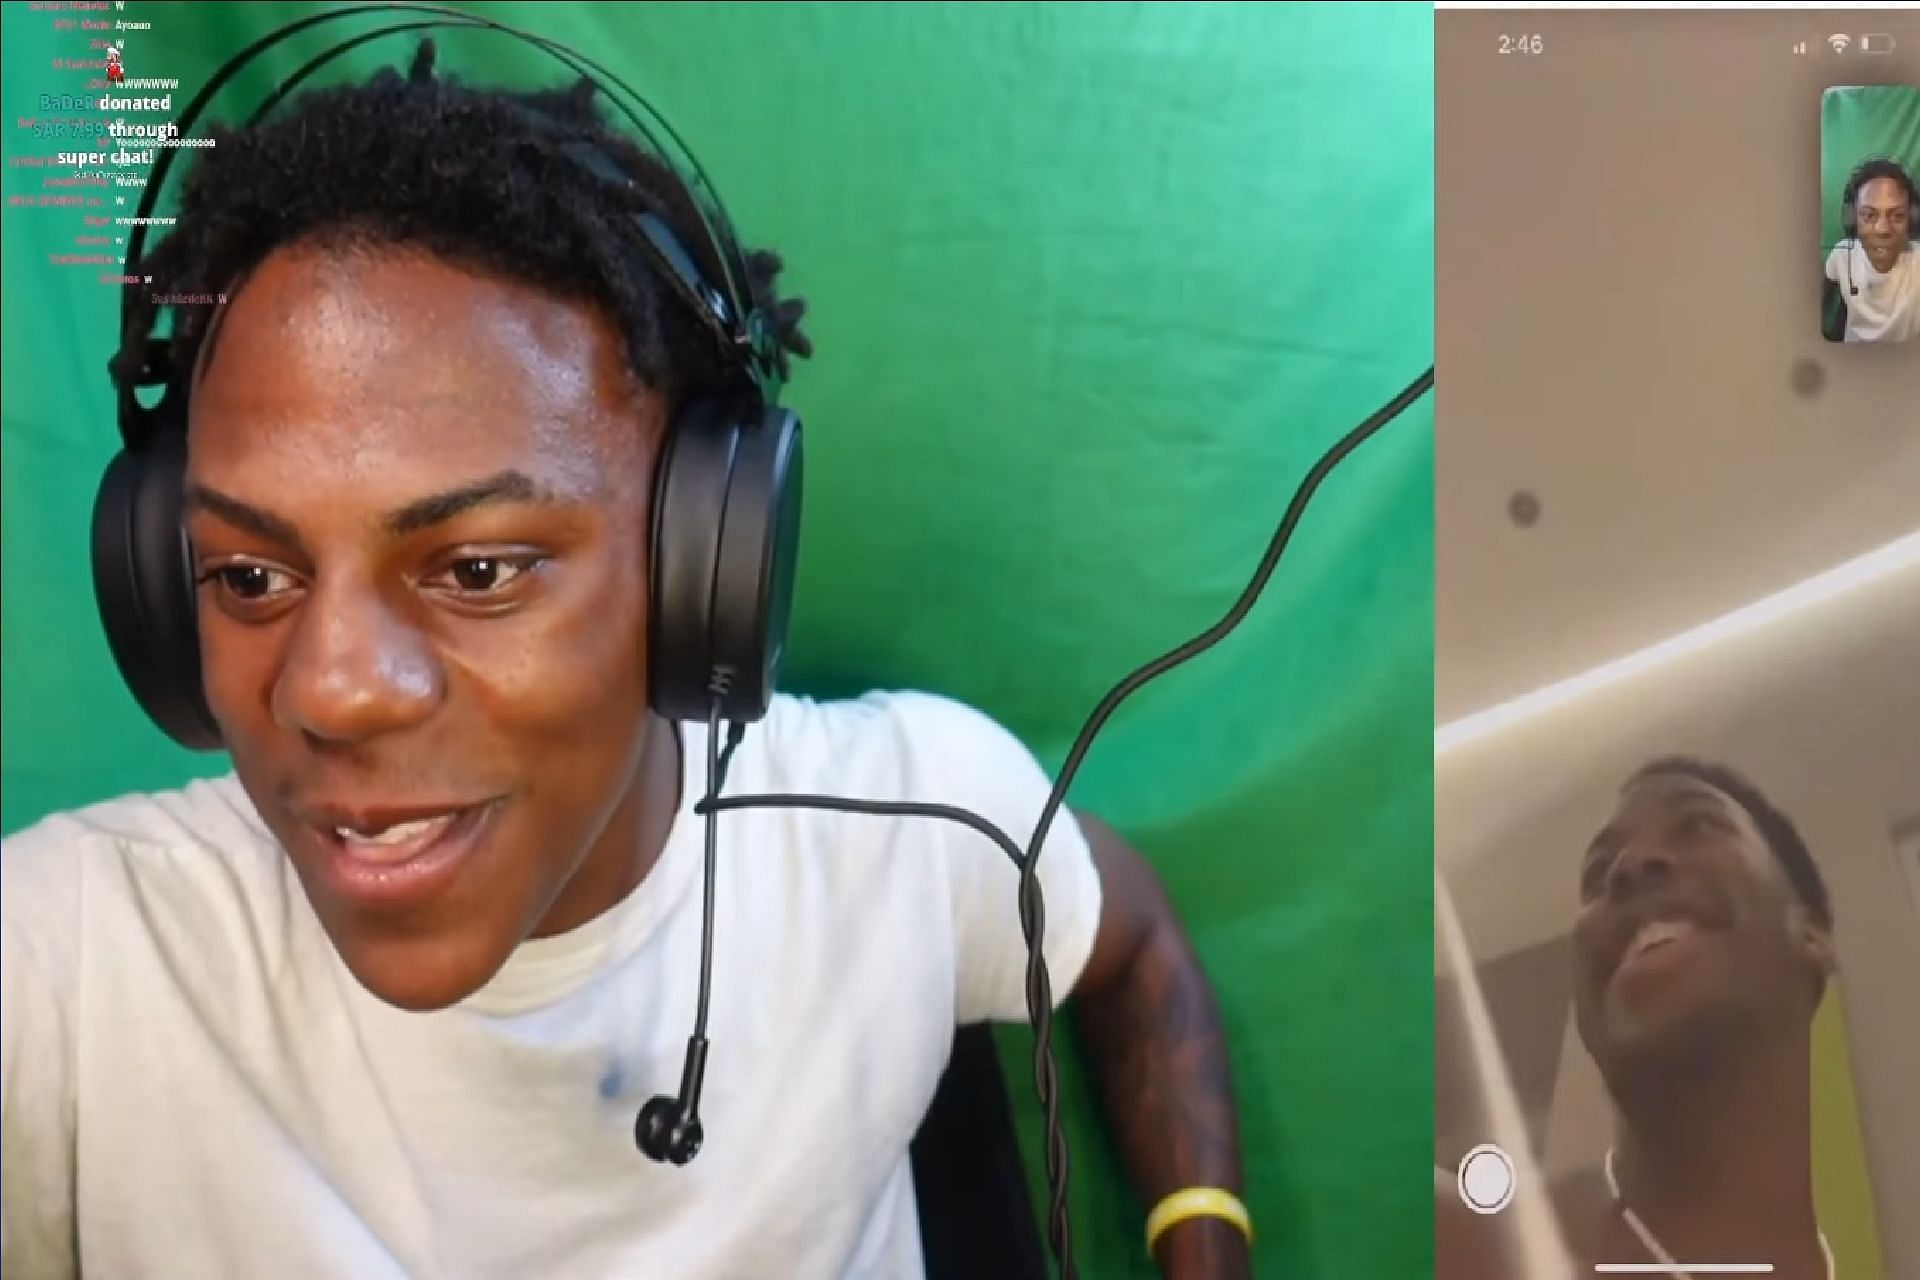 Speed and Elanga Facetime each other on stream (Image via Live Speedy/YouTube)